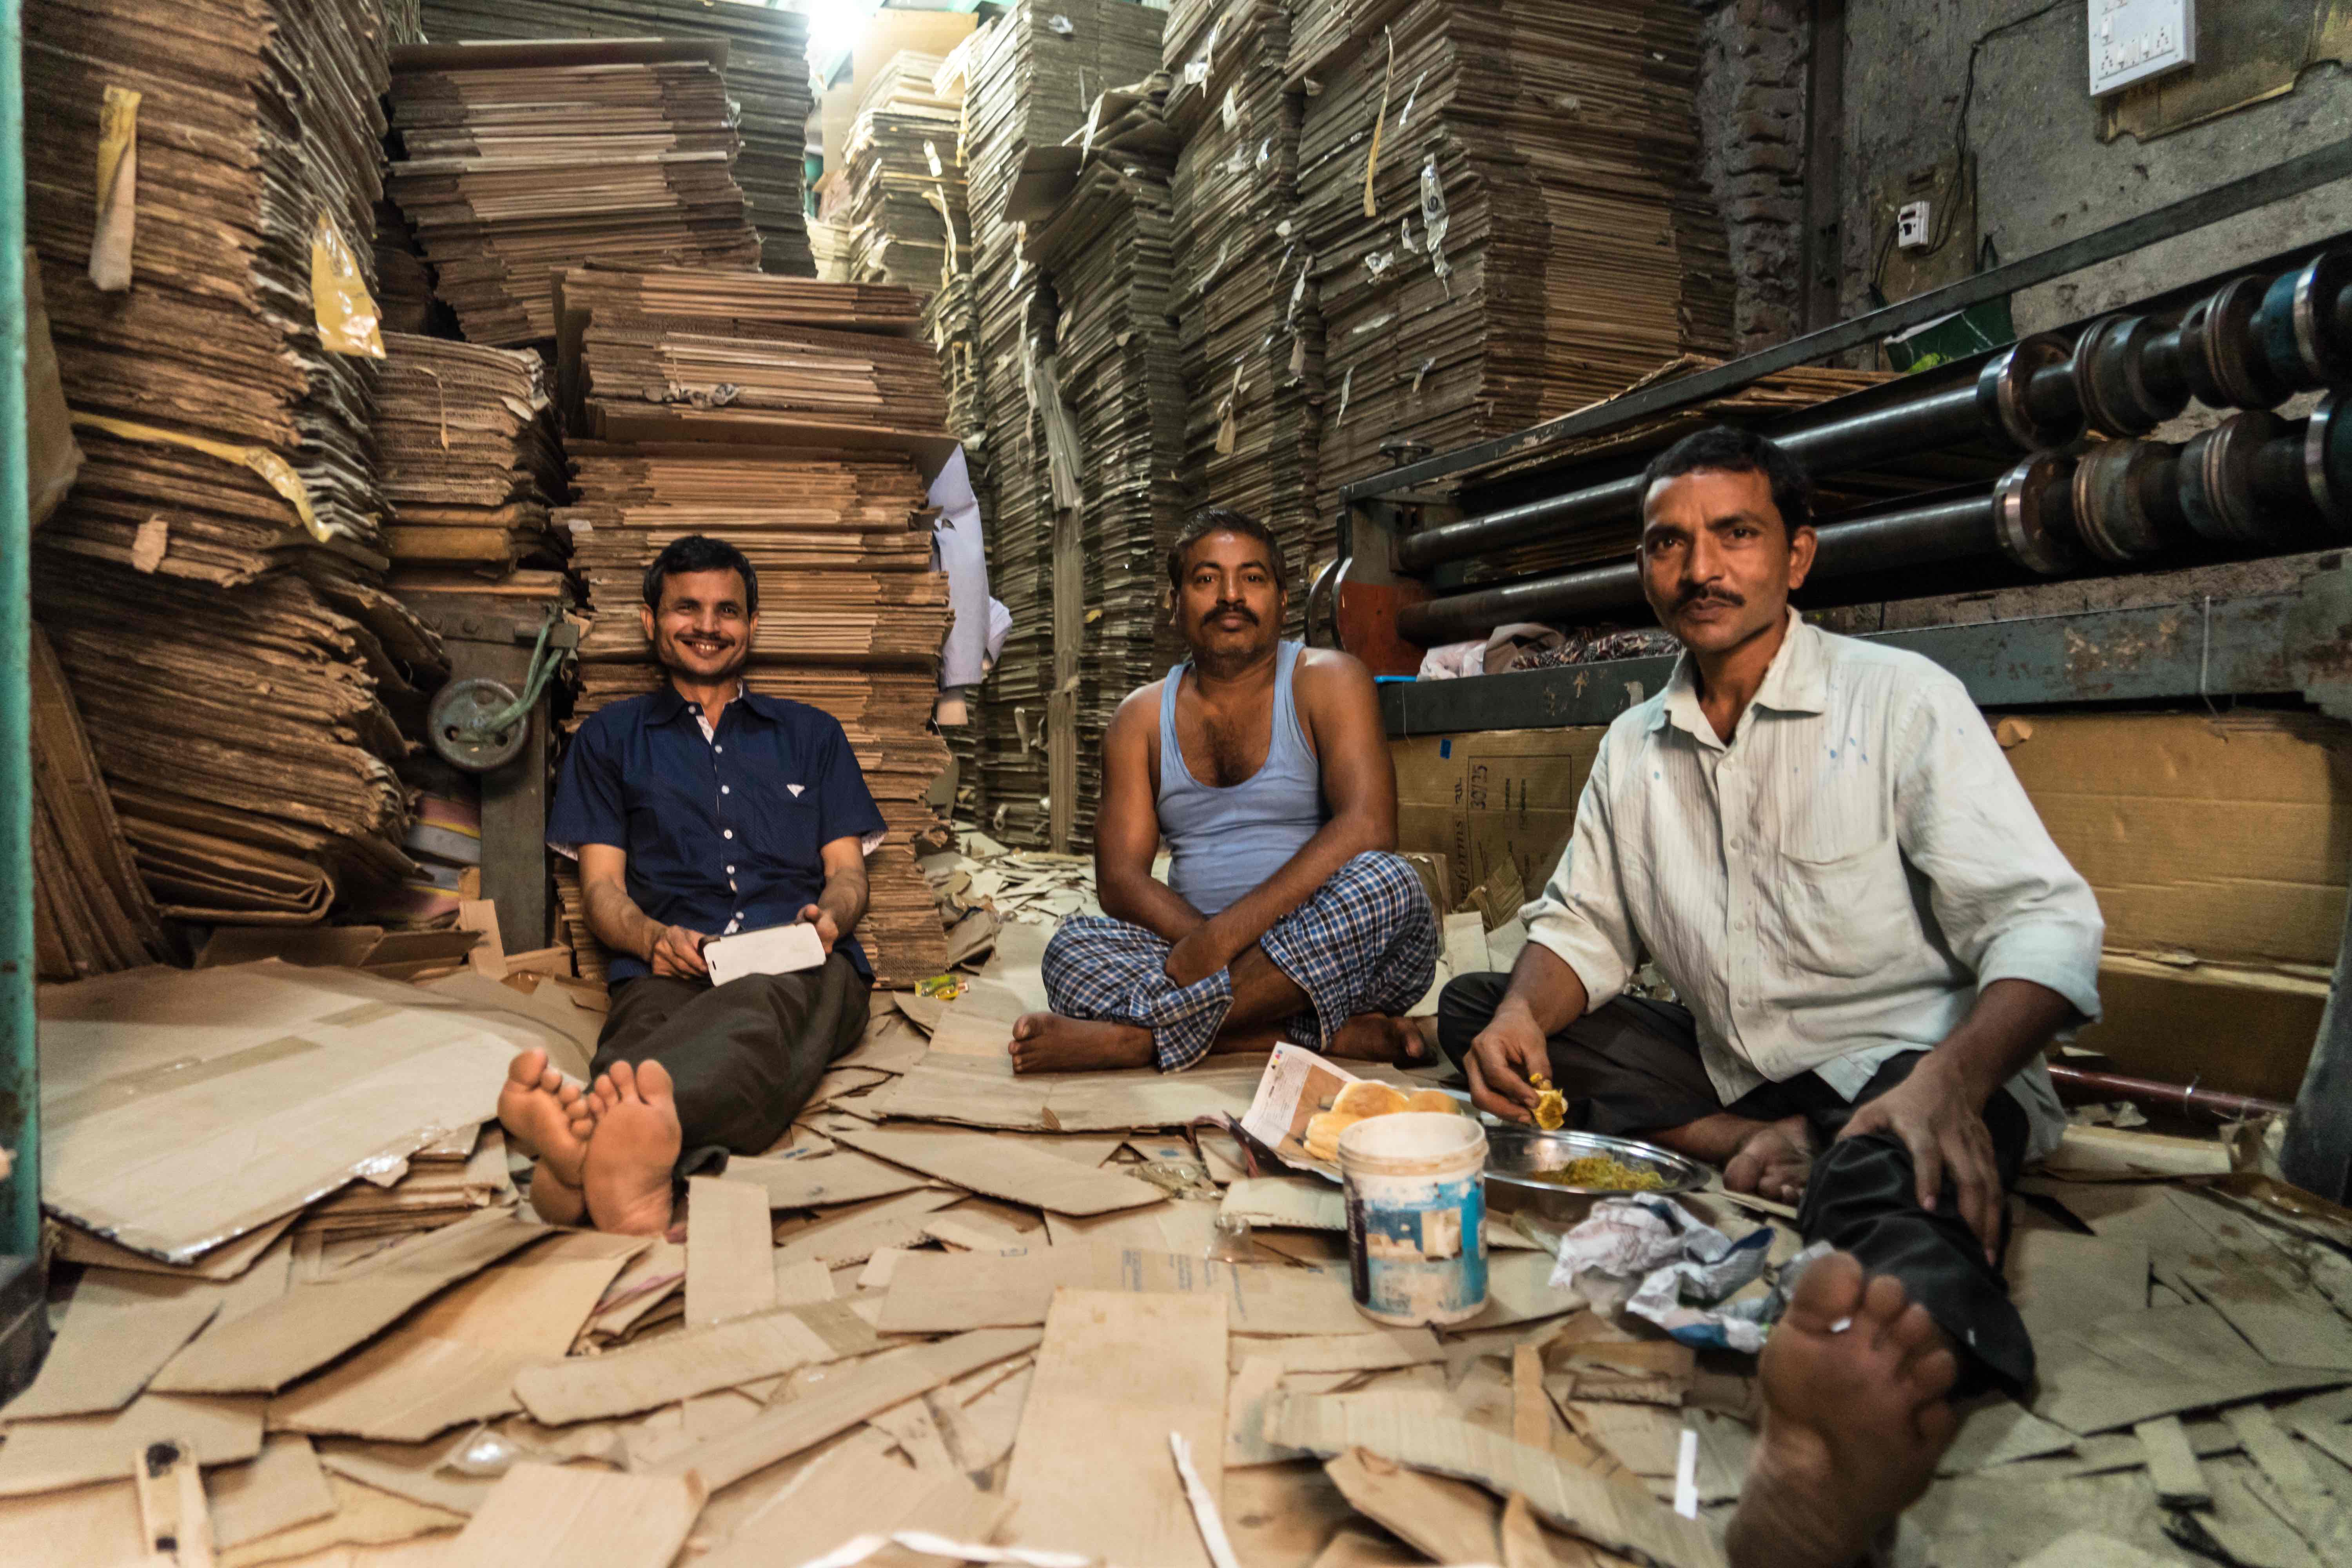 Lunch time in one of the small businesses that receives brown cardboard boxes from all parts of Mumbai